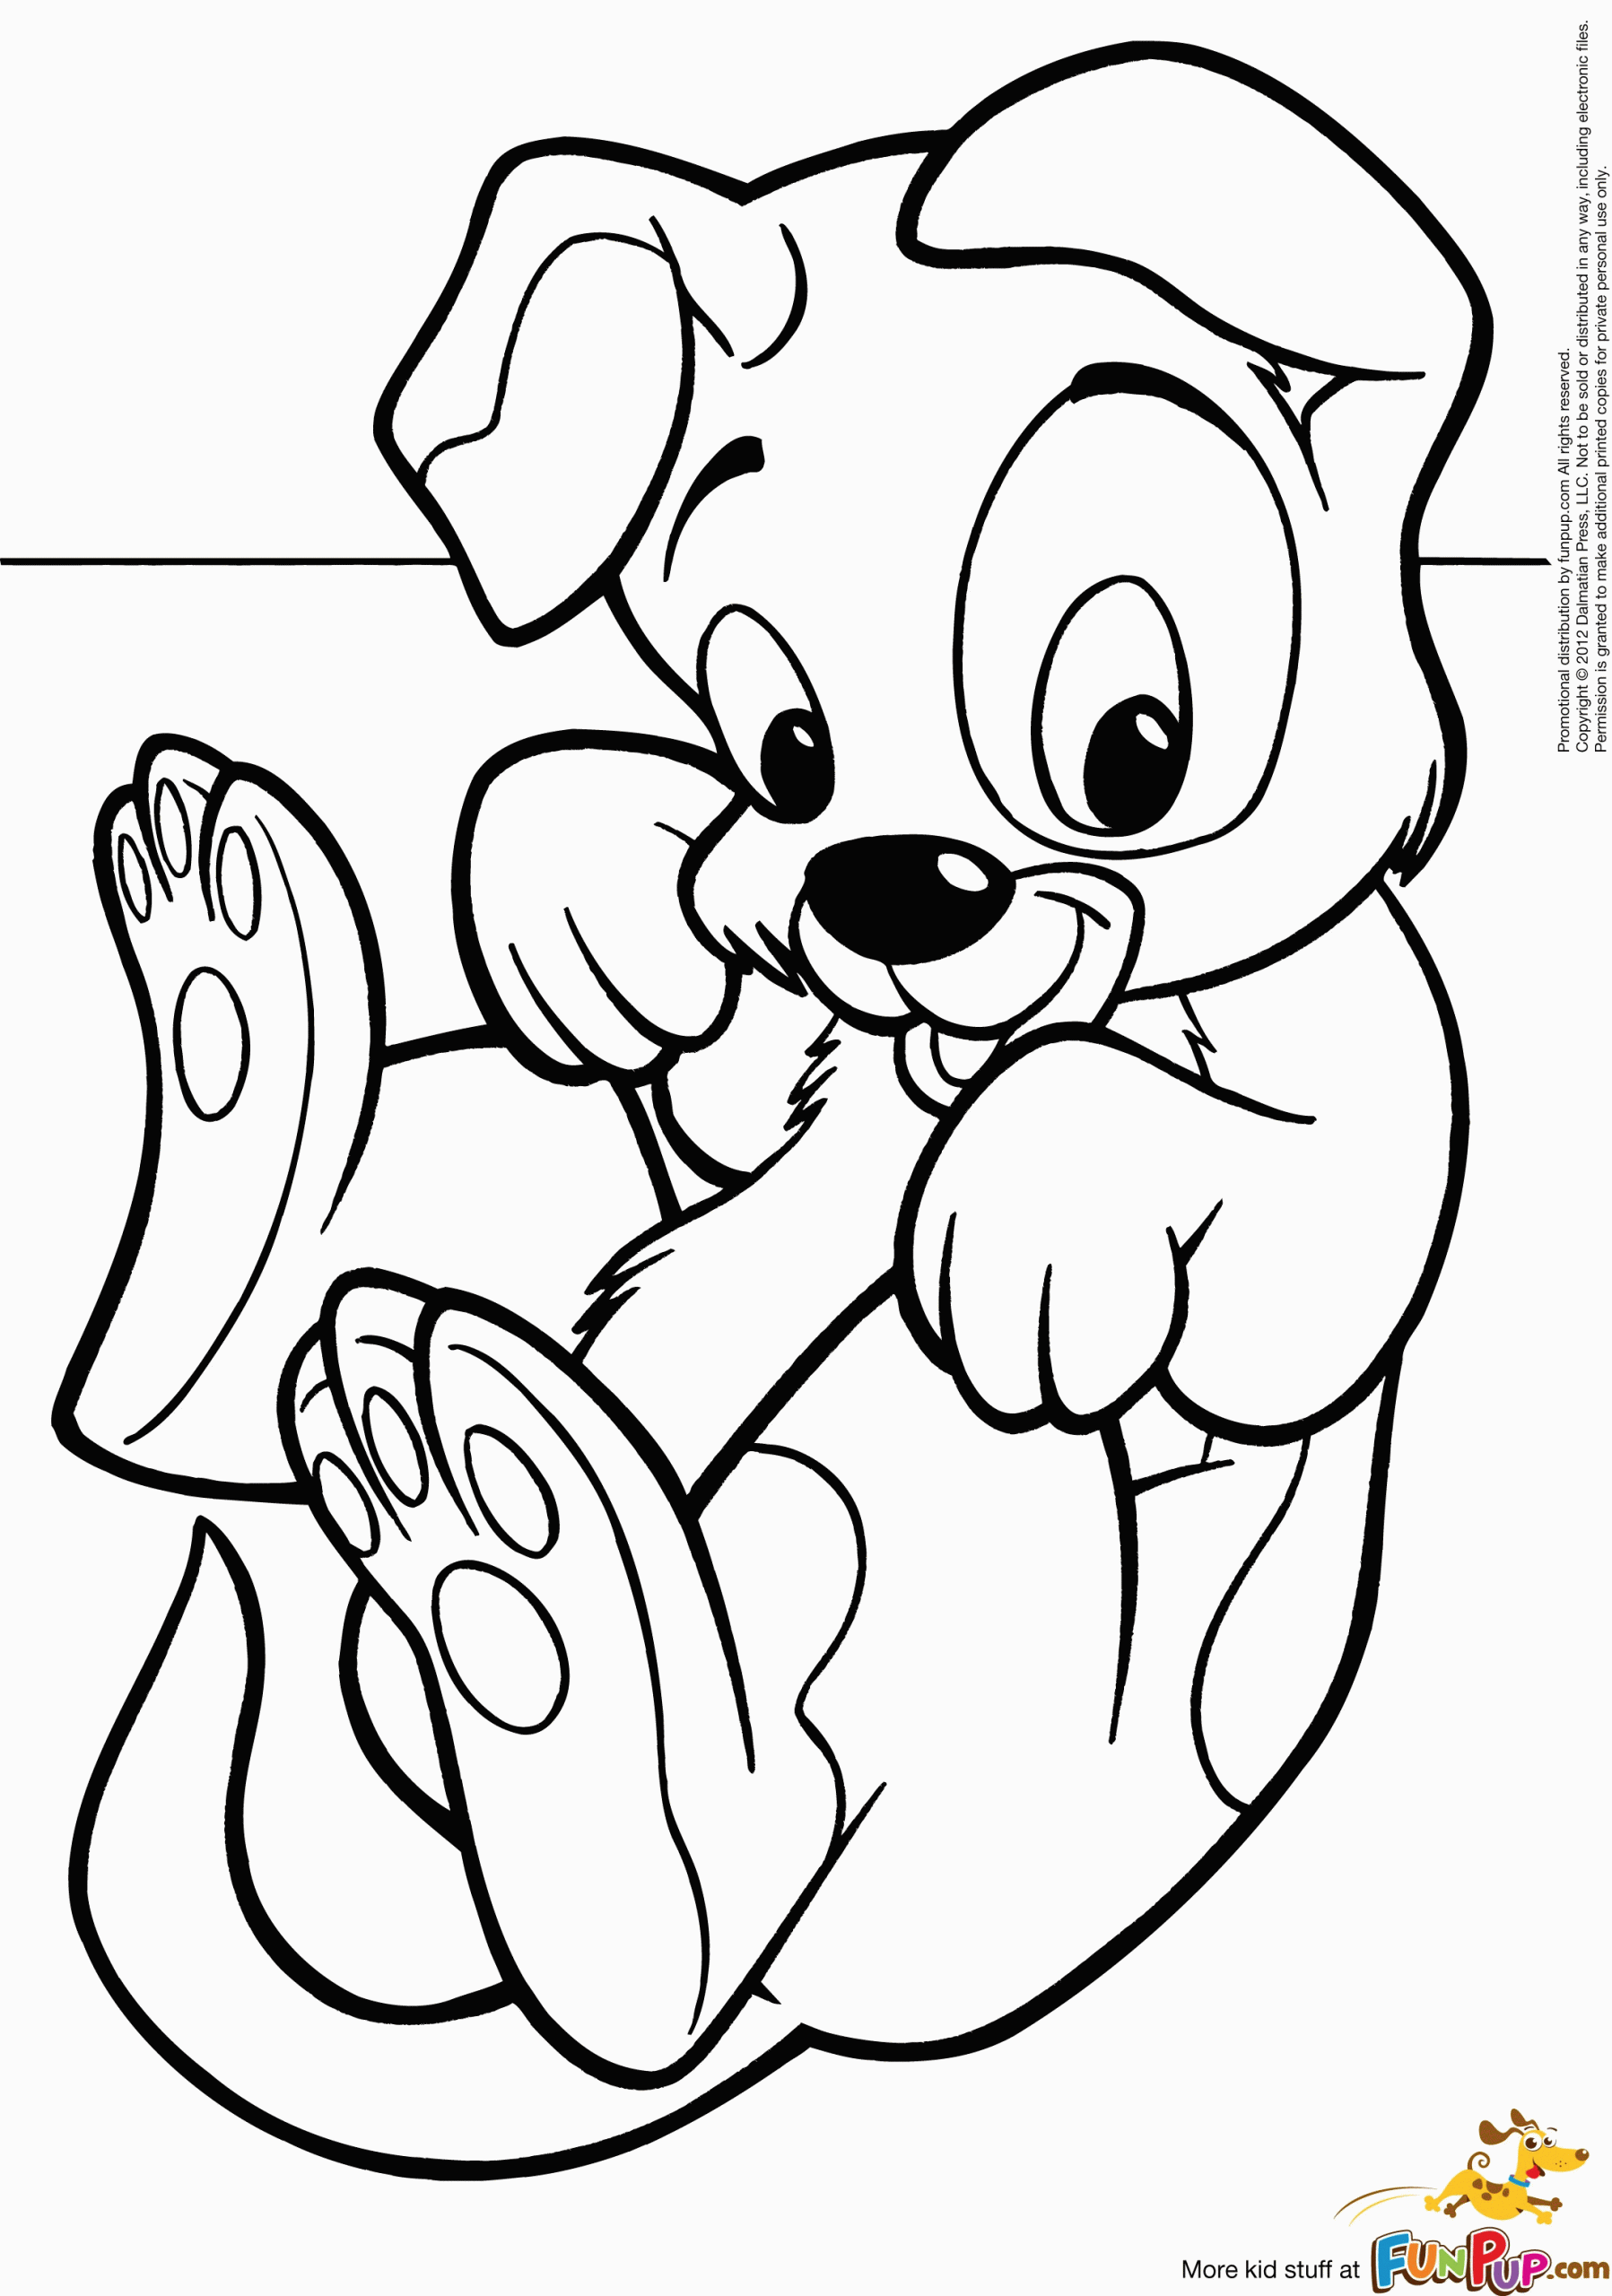 Baby Dog Coloring Pages
 Kitten And Puppy Coloring Pages To Print Coloring Home